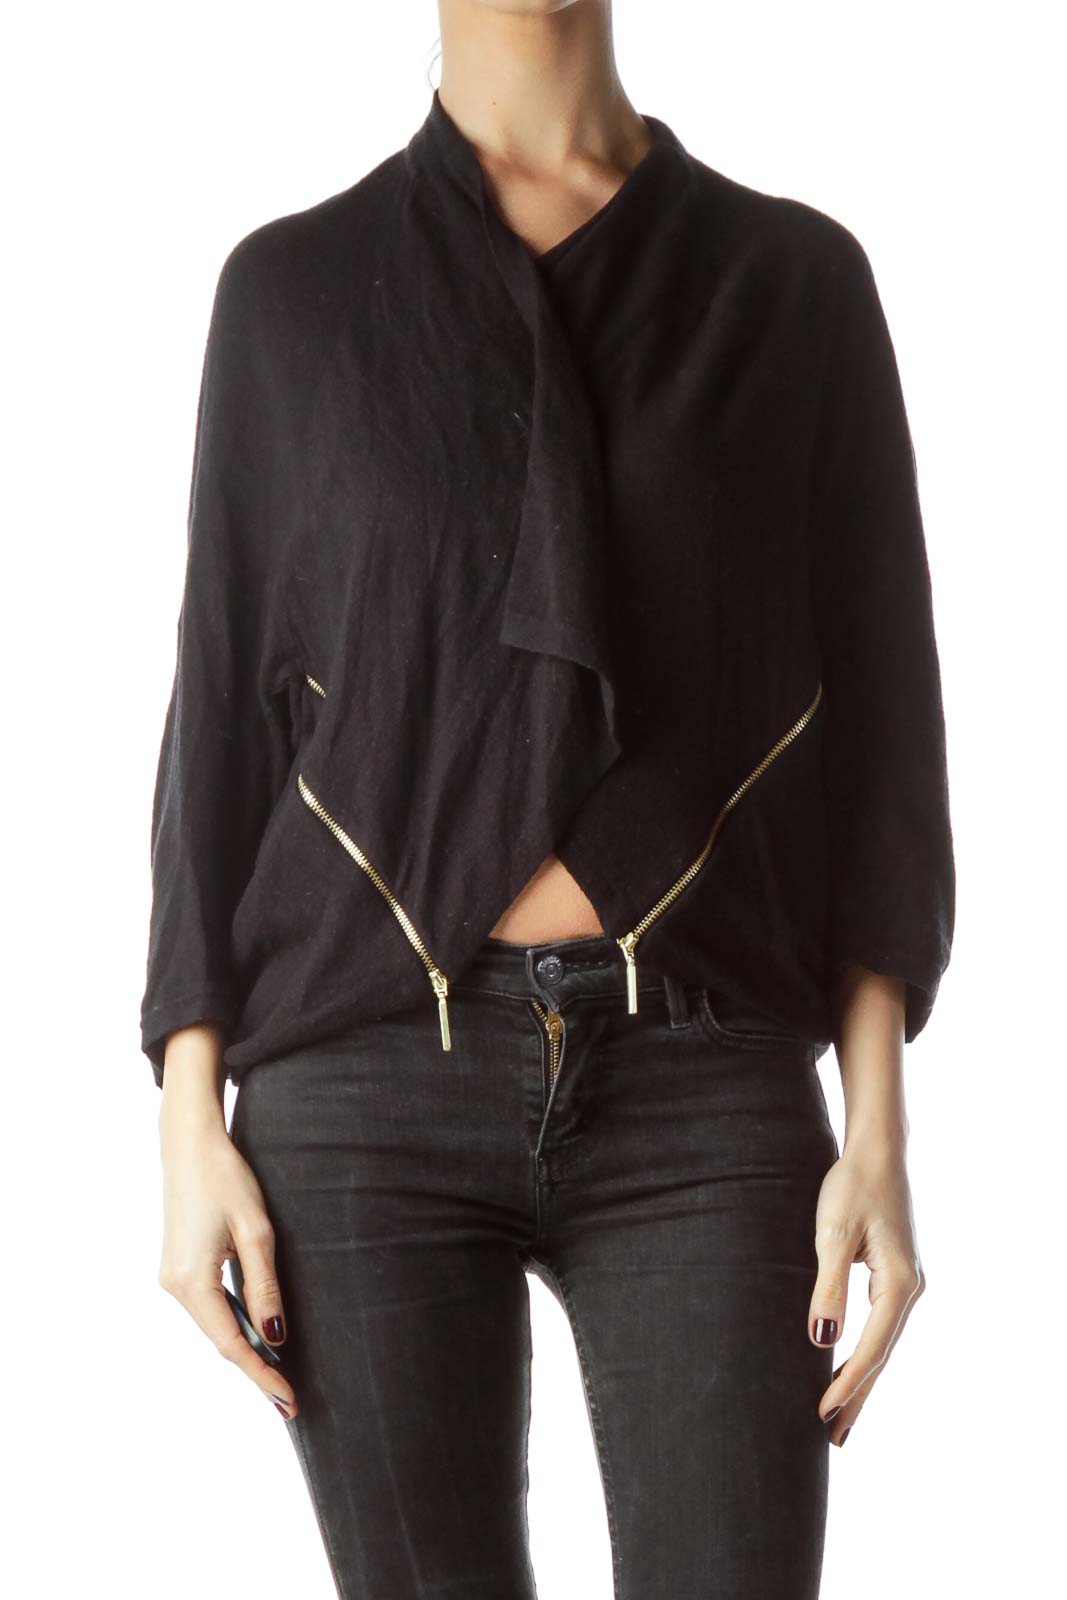 Black Knit Zipper Accents Waterfall Cardigan Front